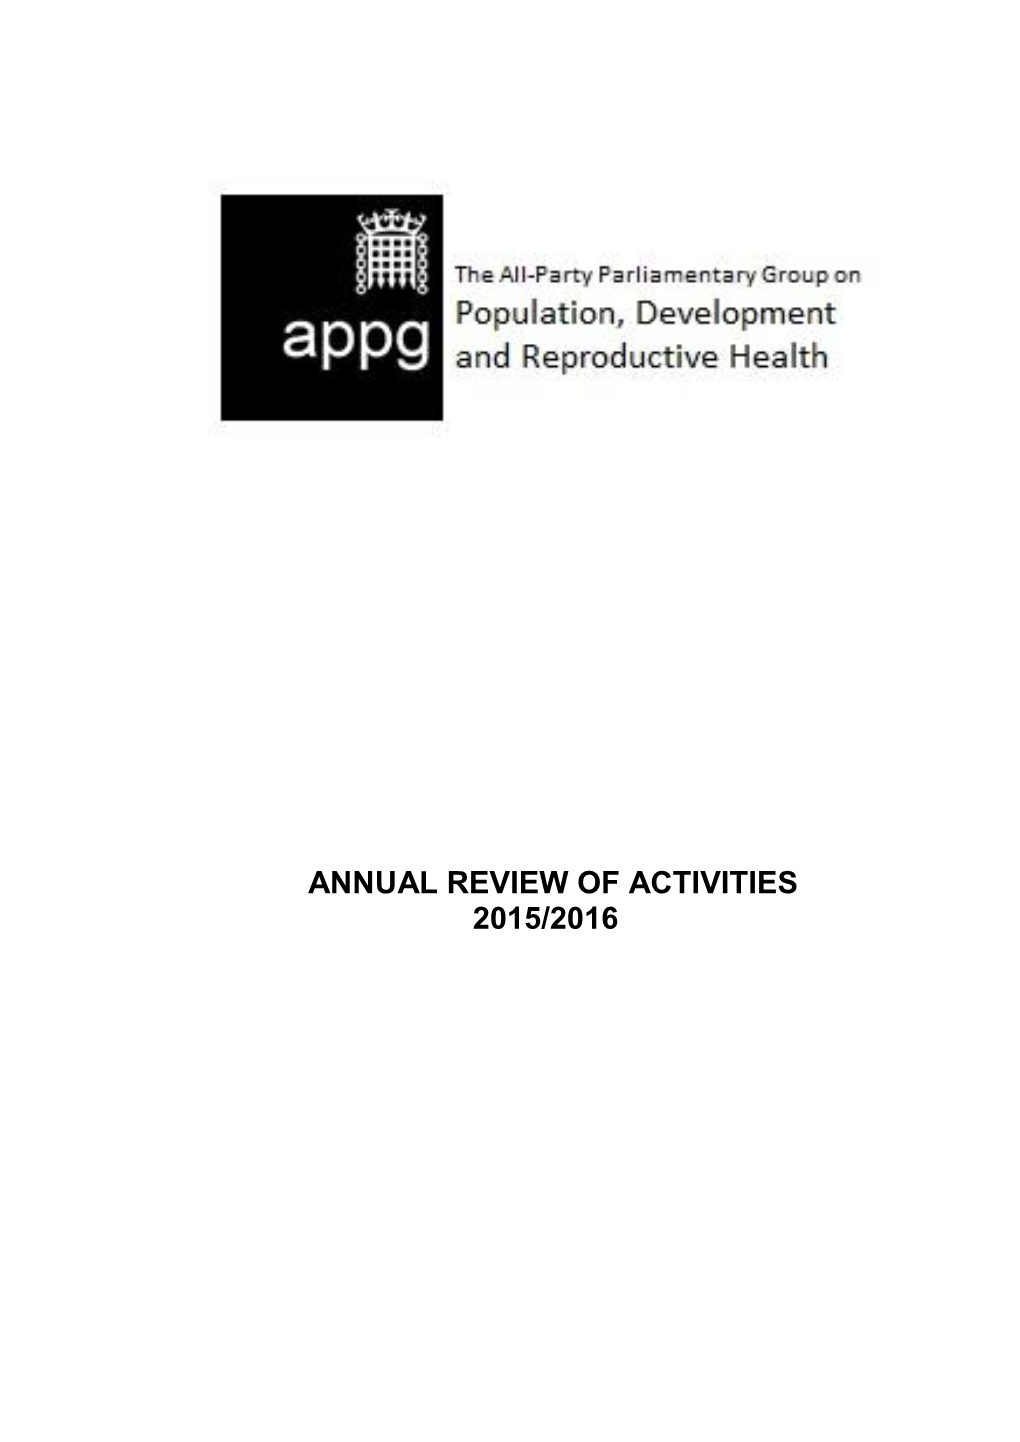 Annual Review of Activities 2015/2016